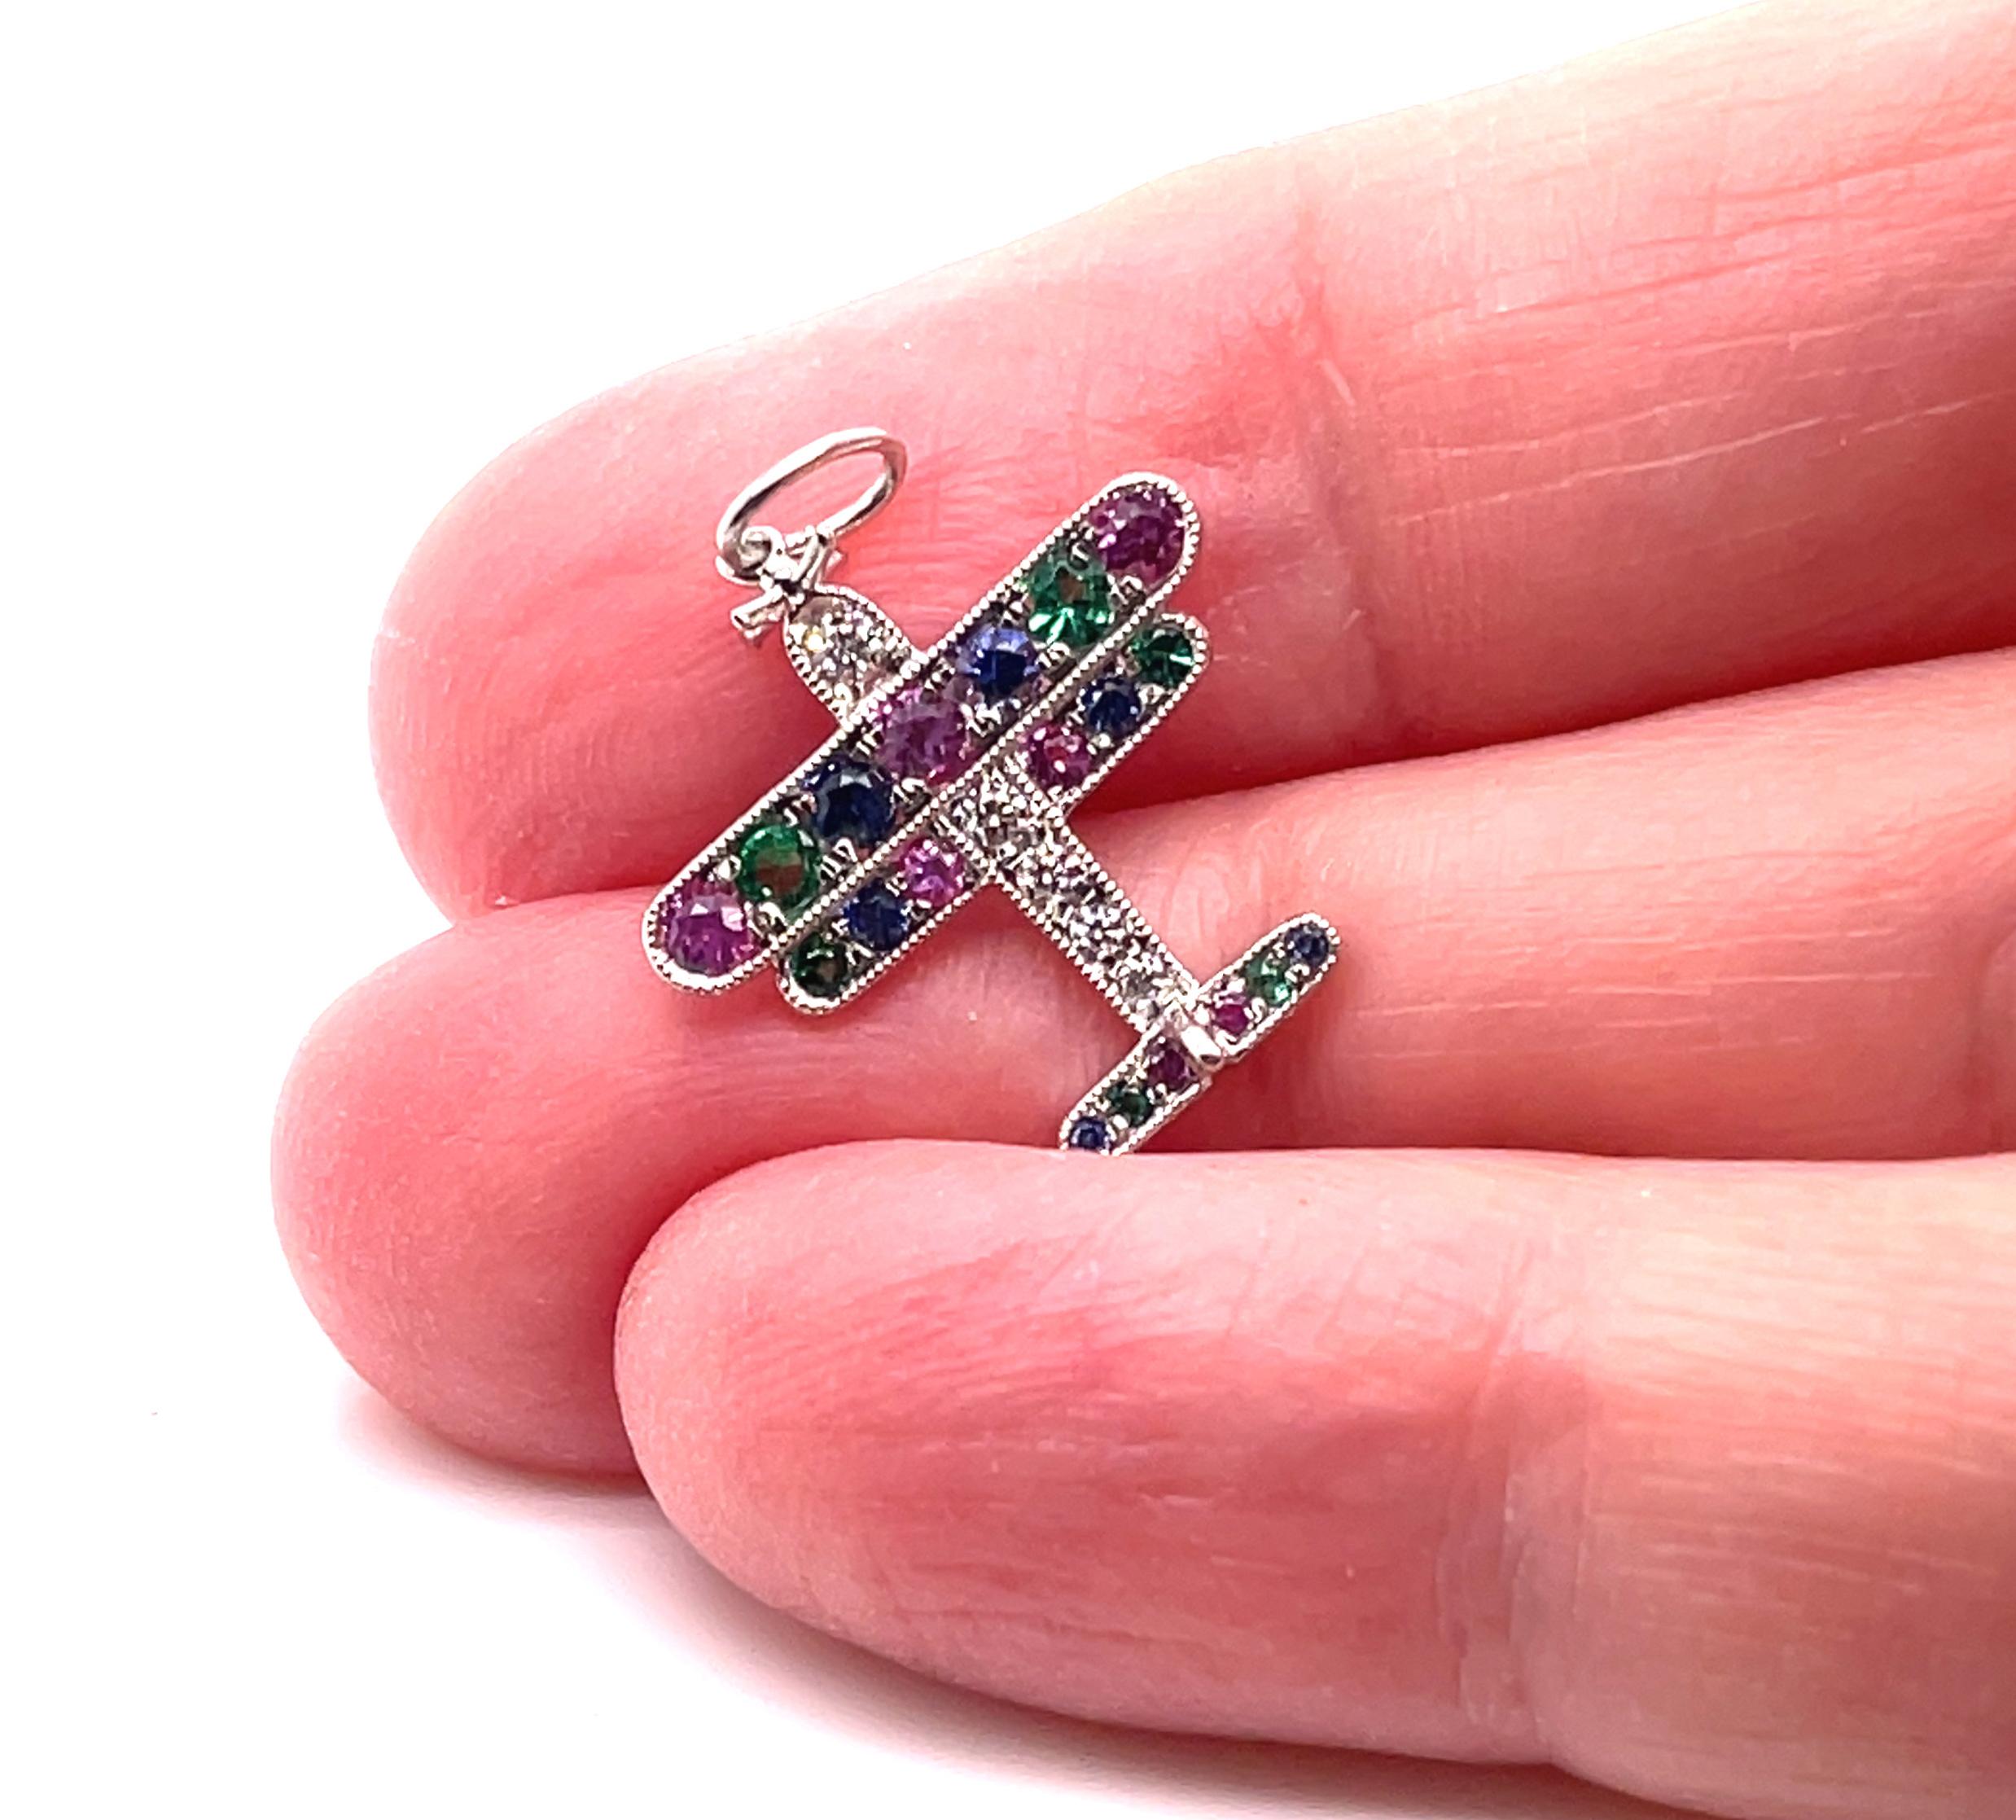 This is an adorable authentic plane charm or pendant from Tiffany & Co. It is crafted from platinum featuring a double wing set with pink and blue sapphires and has green tsavorite with diamonds, all bordered around the edge with fine milgrain